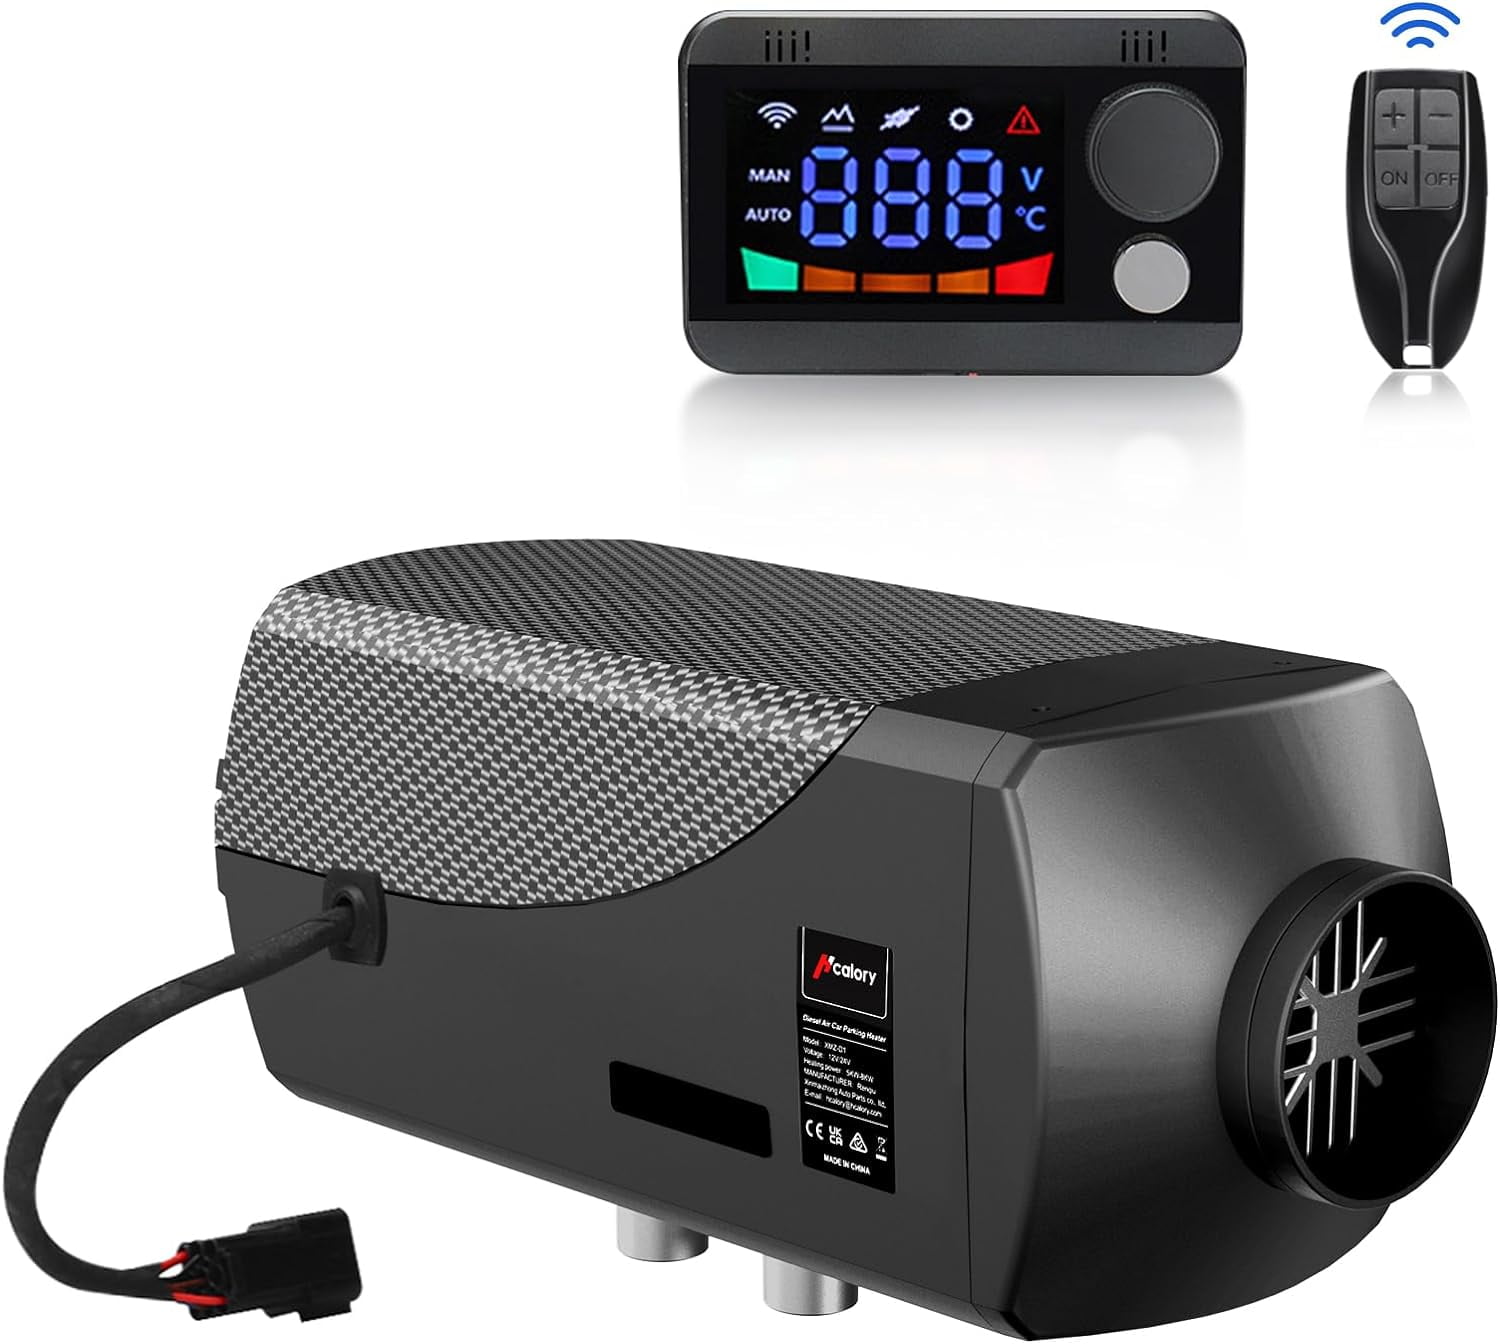 HCALORY Diesel Air Heater, 12V DC & 110V AC 5KW-8KW Horizontal All-In-One  Portable Parking Heater with Bluetooth APP Control for Car Trucks Boat RV